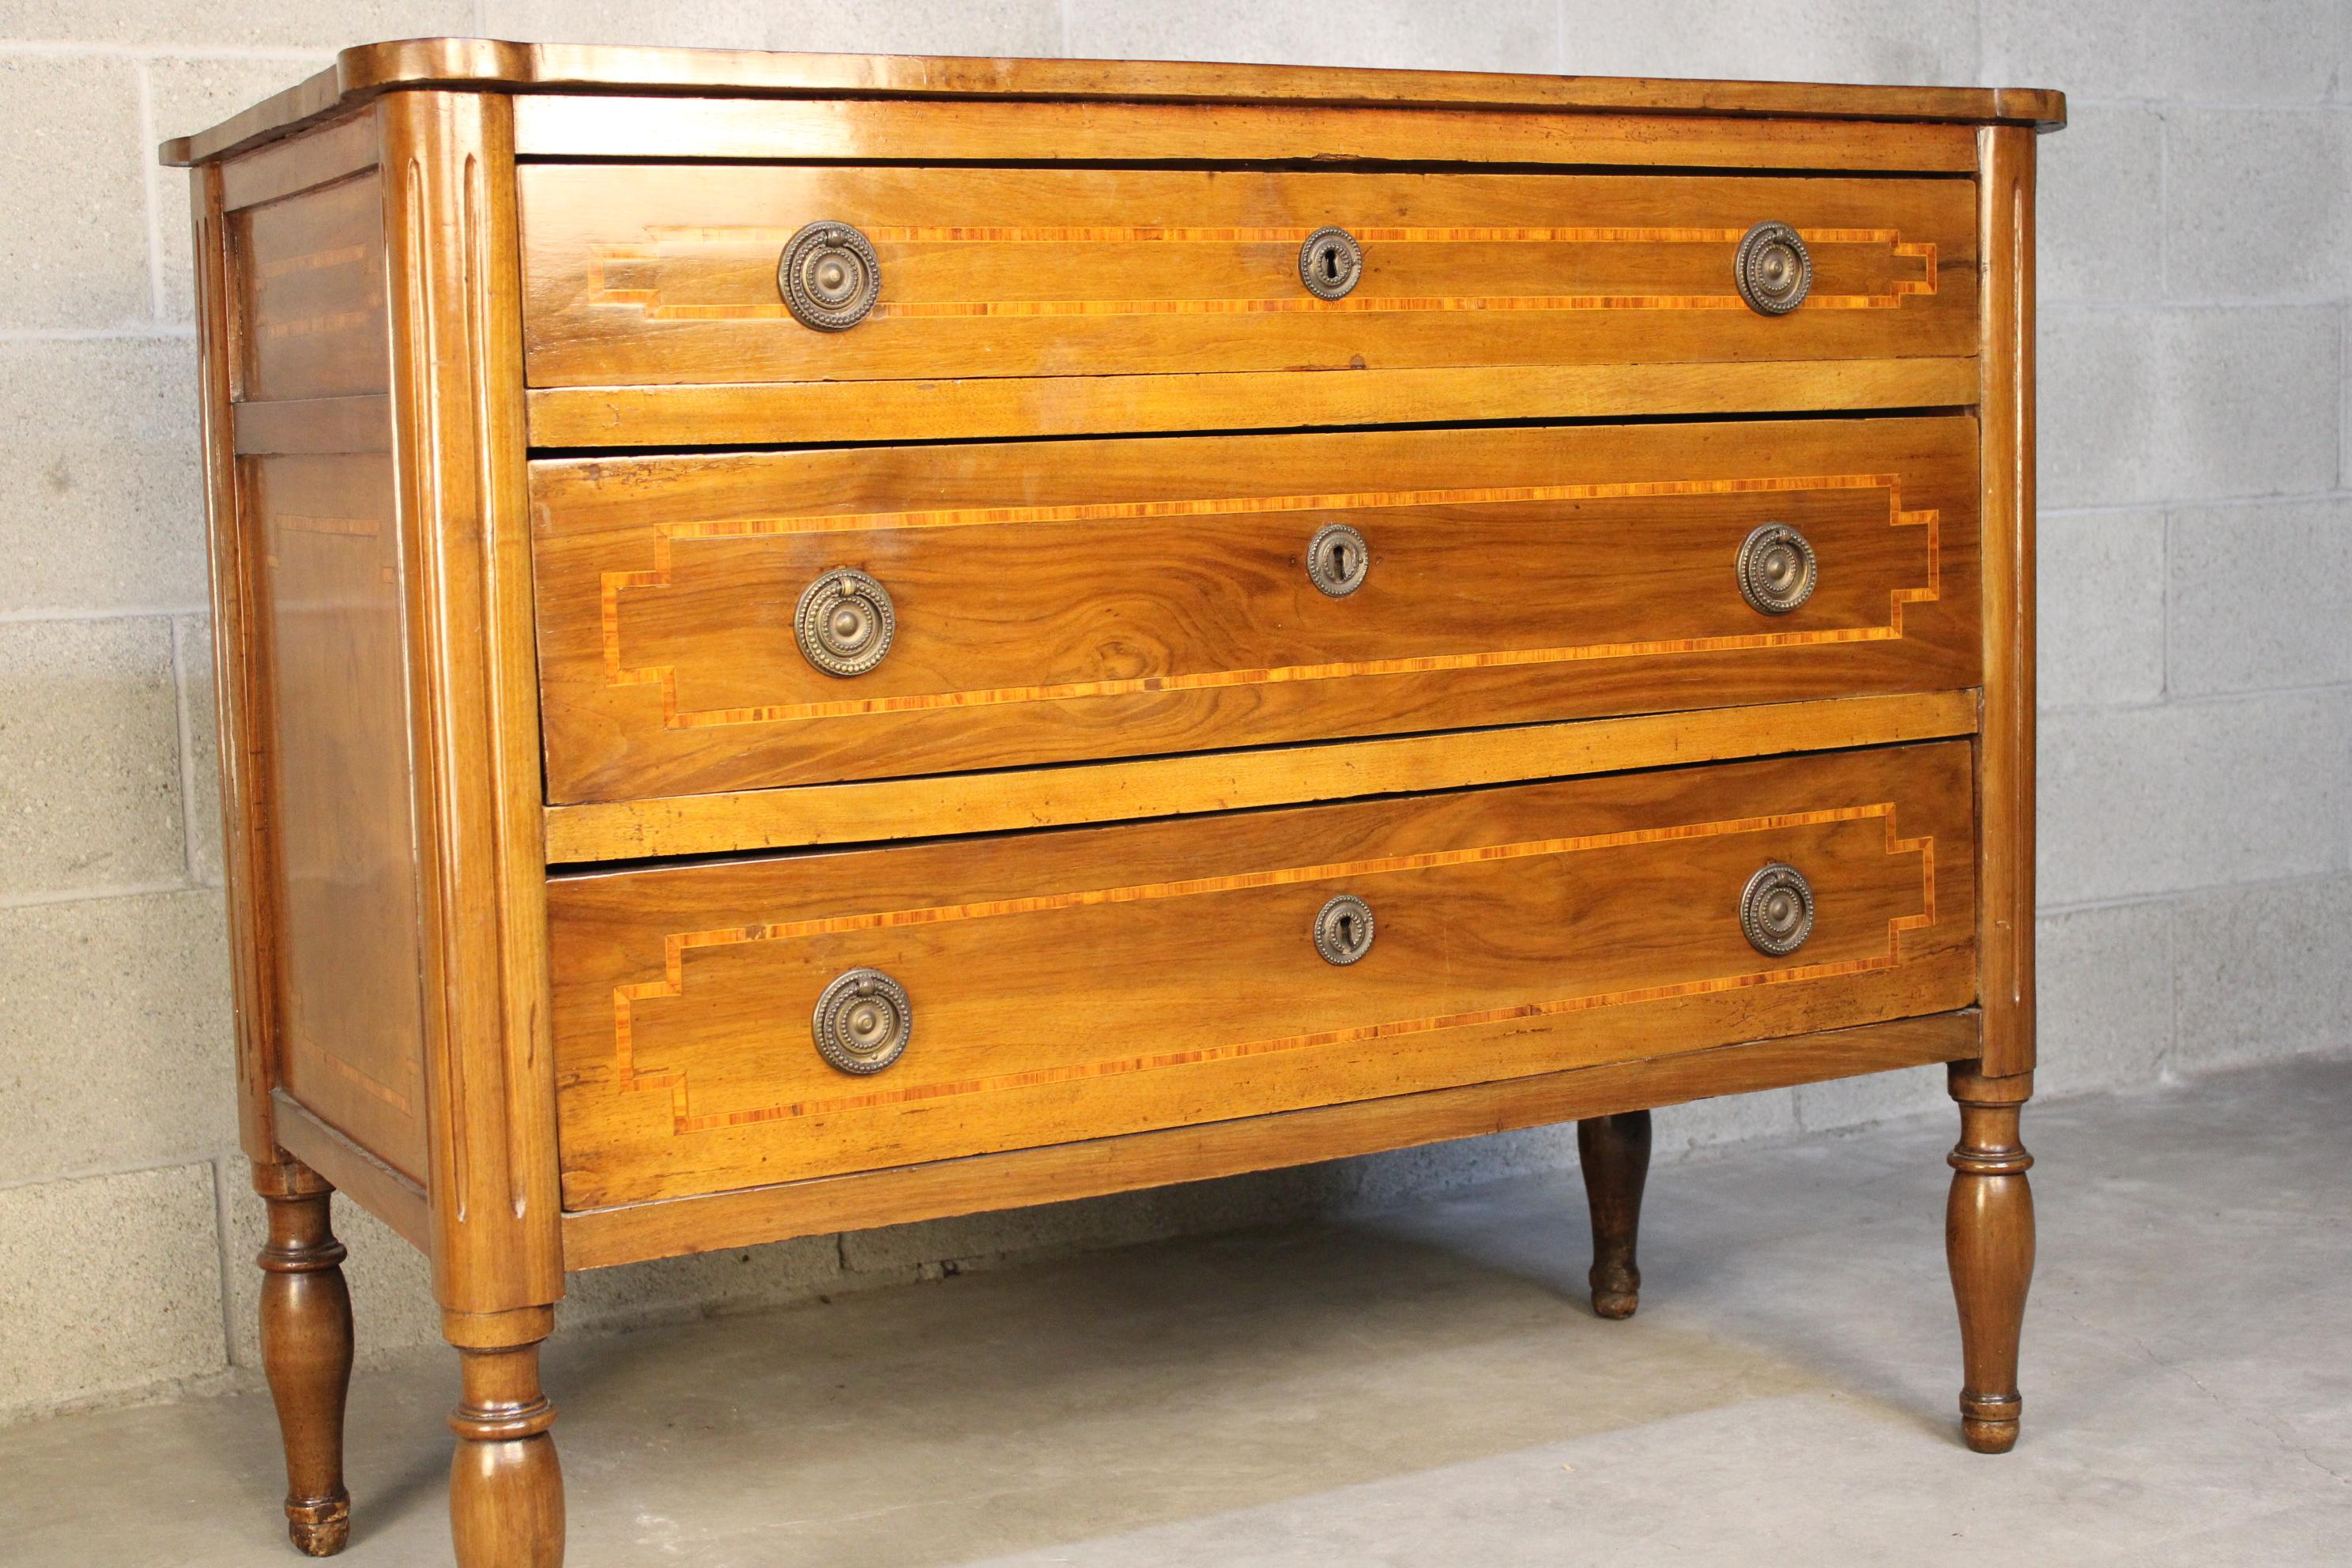 French 18th century Louis XVI Period inlaid Dresser circa 1780 France, antique commode For Sale